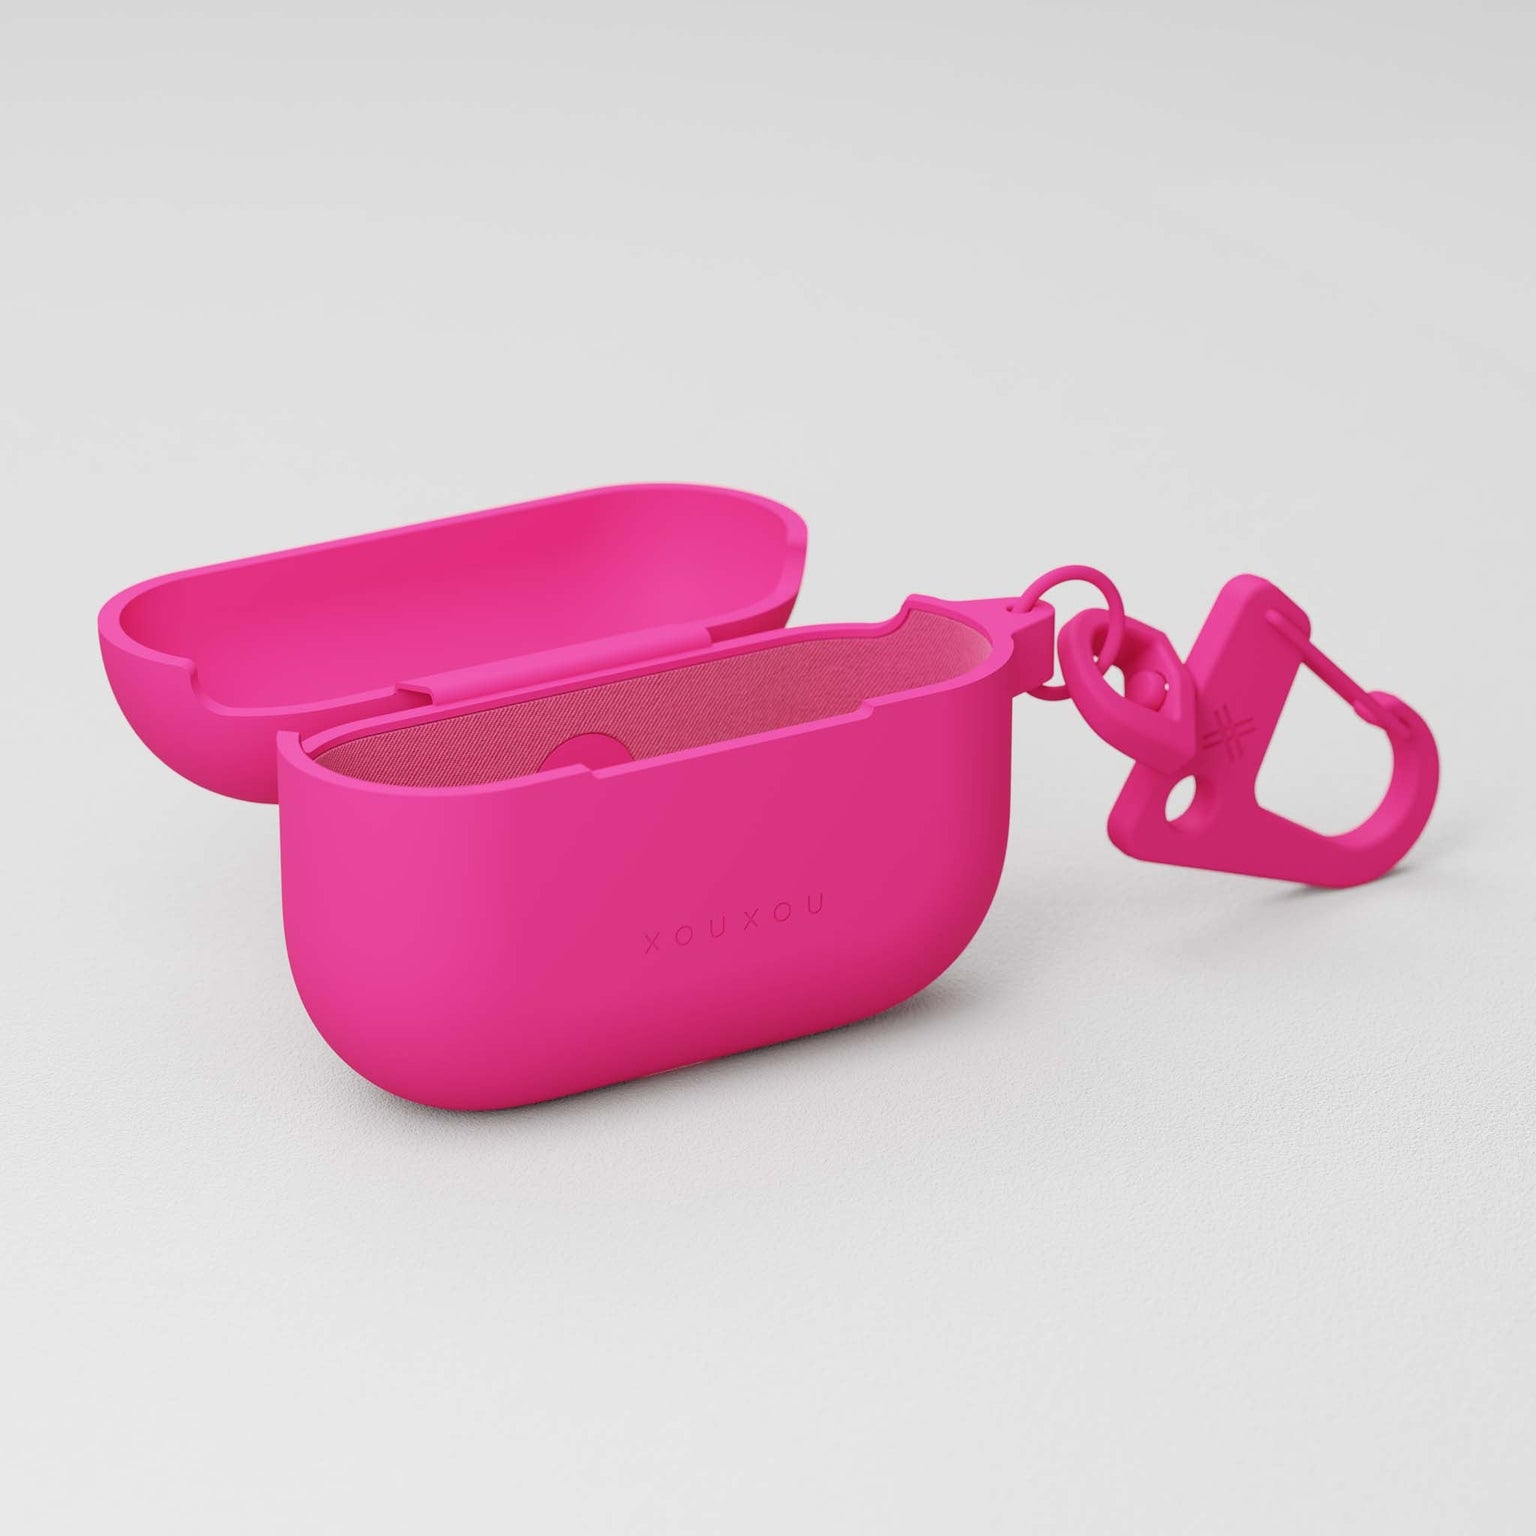 Apple AirPods Pro case in Pink with soft-touch finish and carabiner | XOUXOU